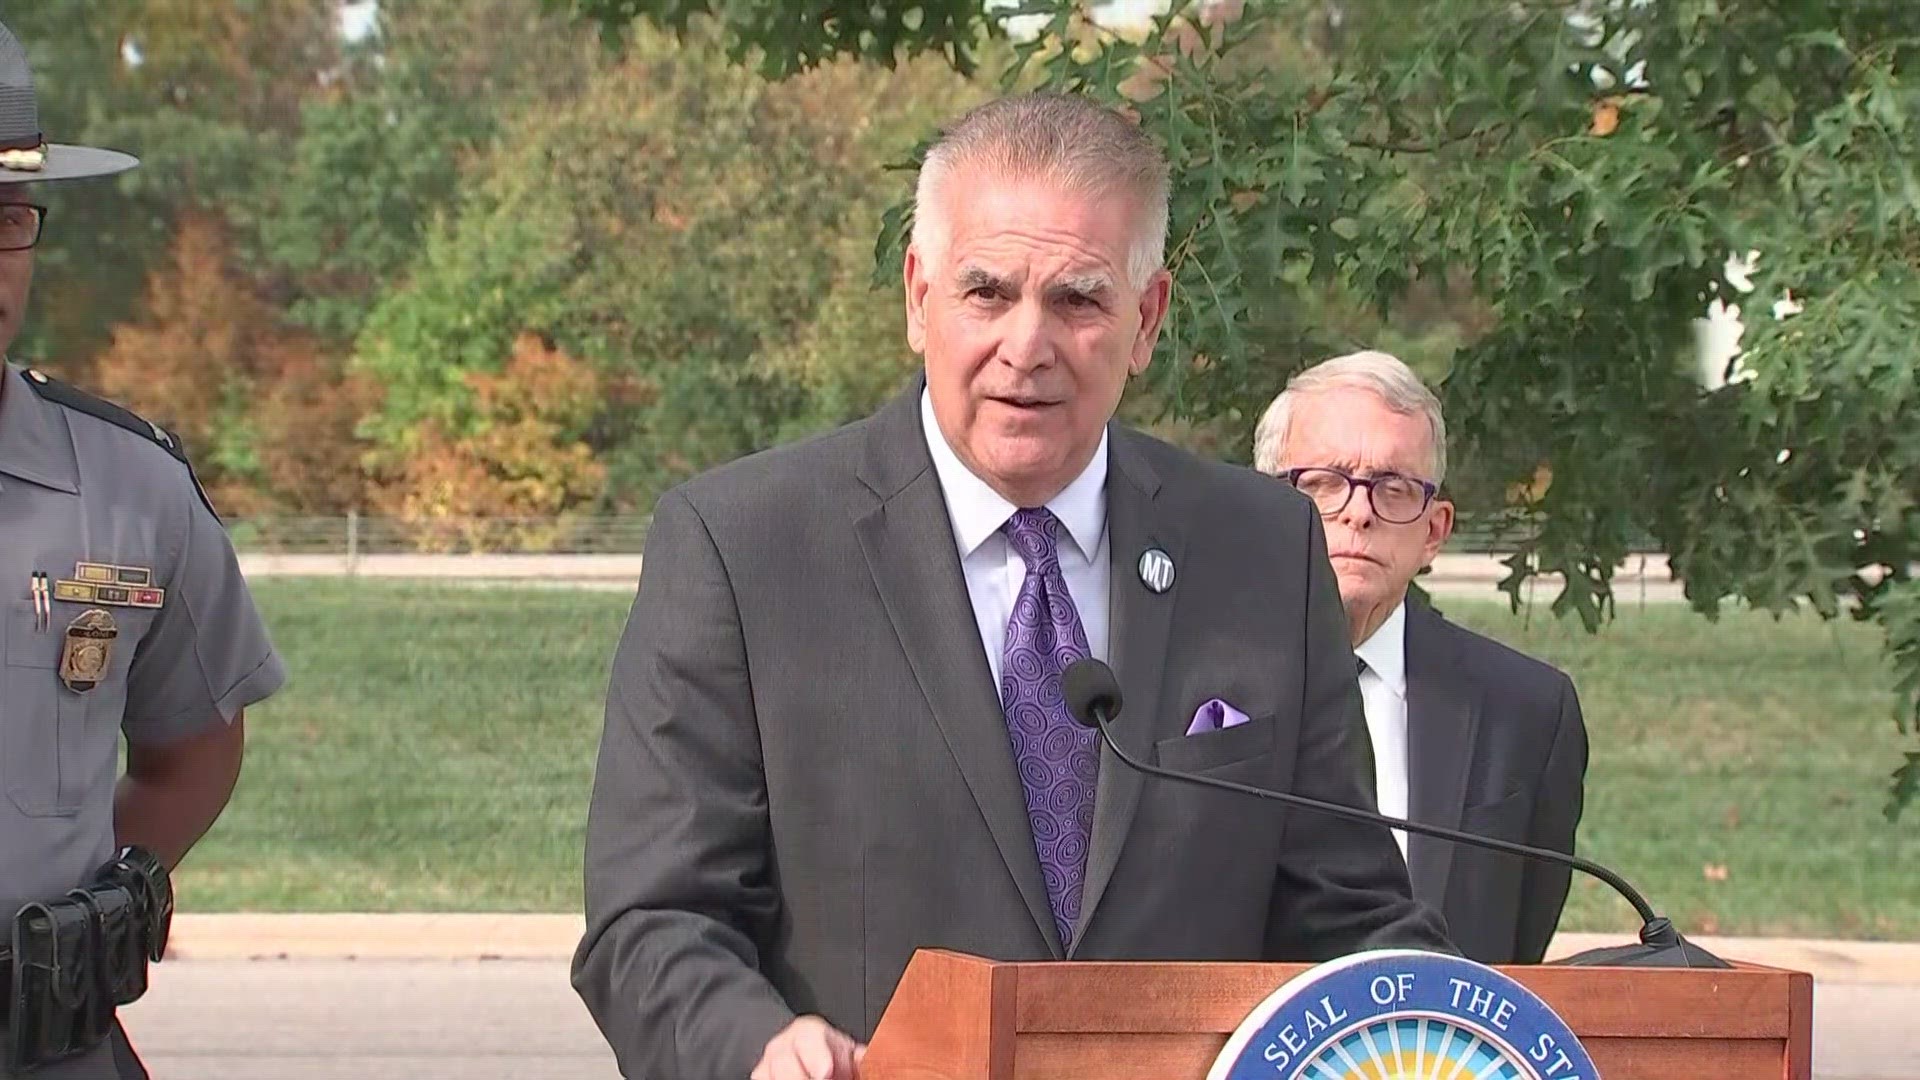 10TV Sports Anchor Dom Tiberi spoke as Ohio's distracted driving law will be enforced starting Thursday.